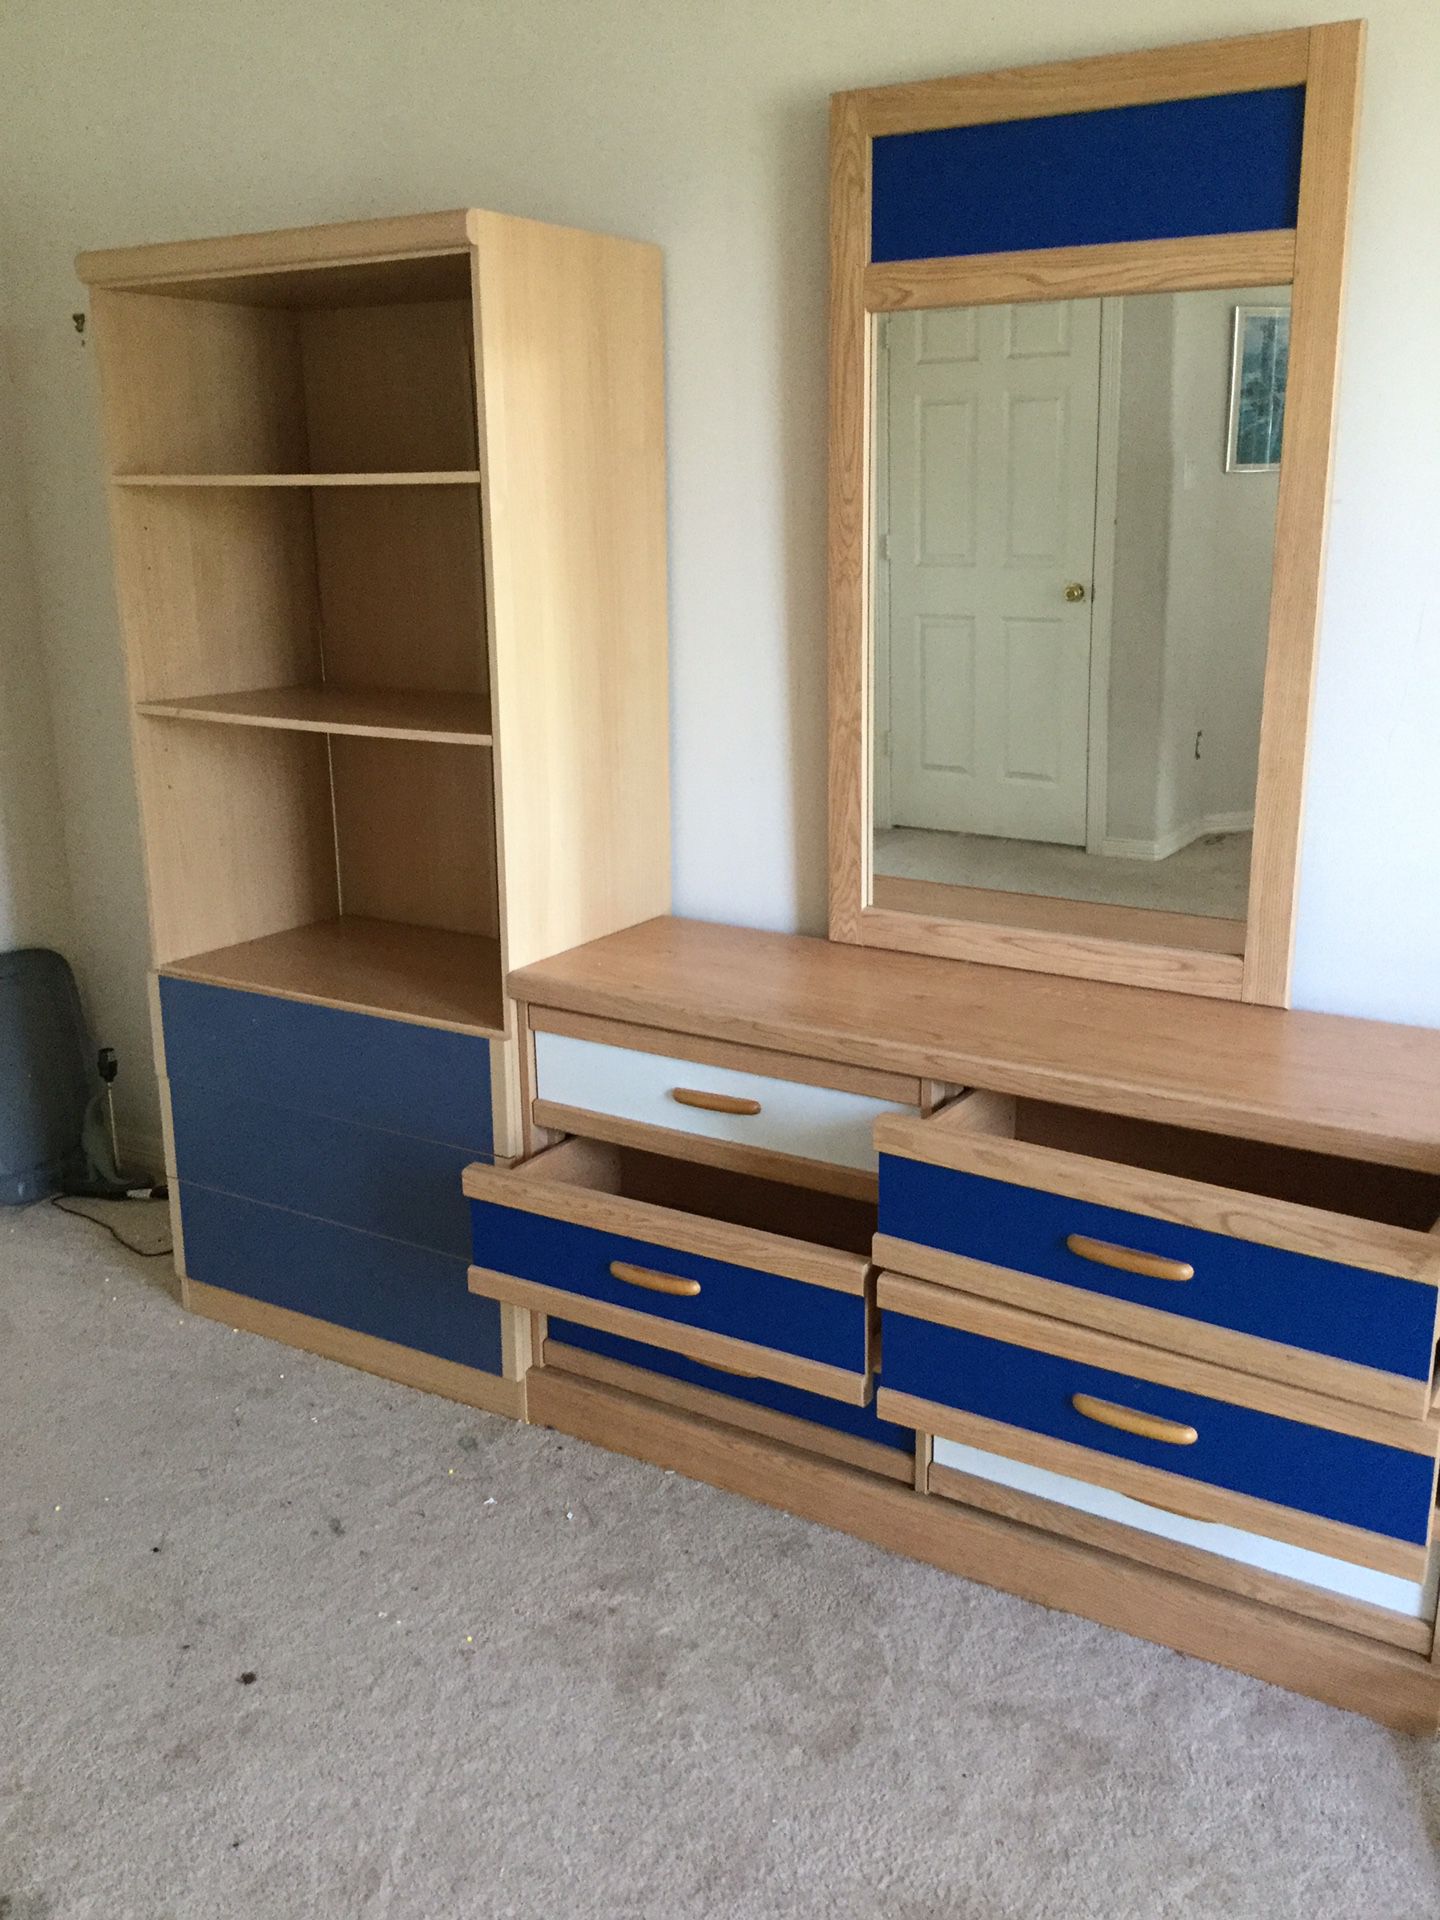 Child’s chest with mirror ( interchangeable drawer fronts blue, white, red, black)and drawer with shelves unit